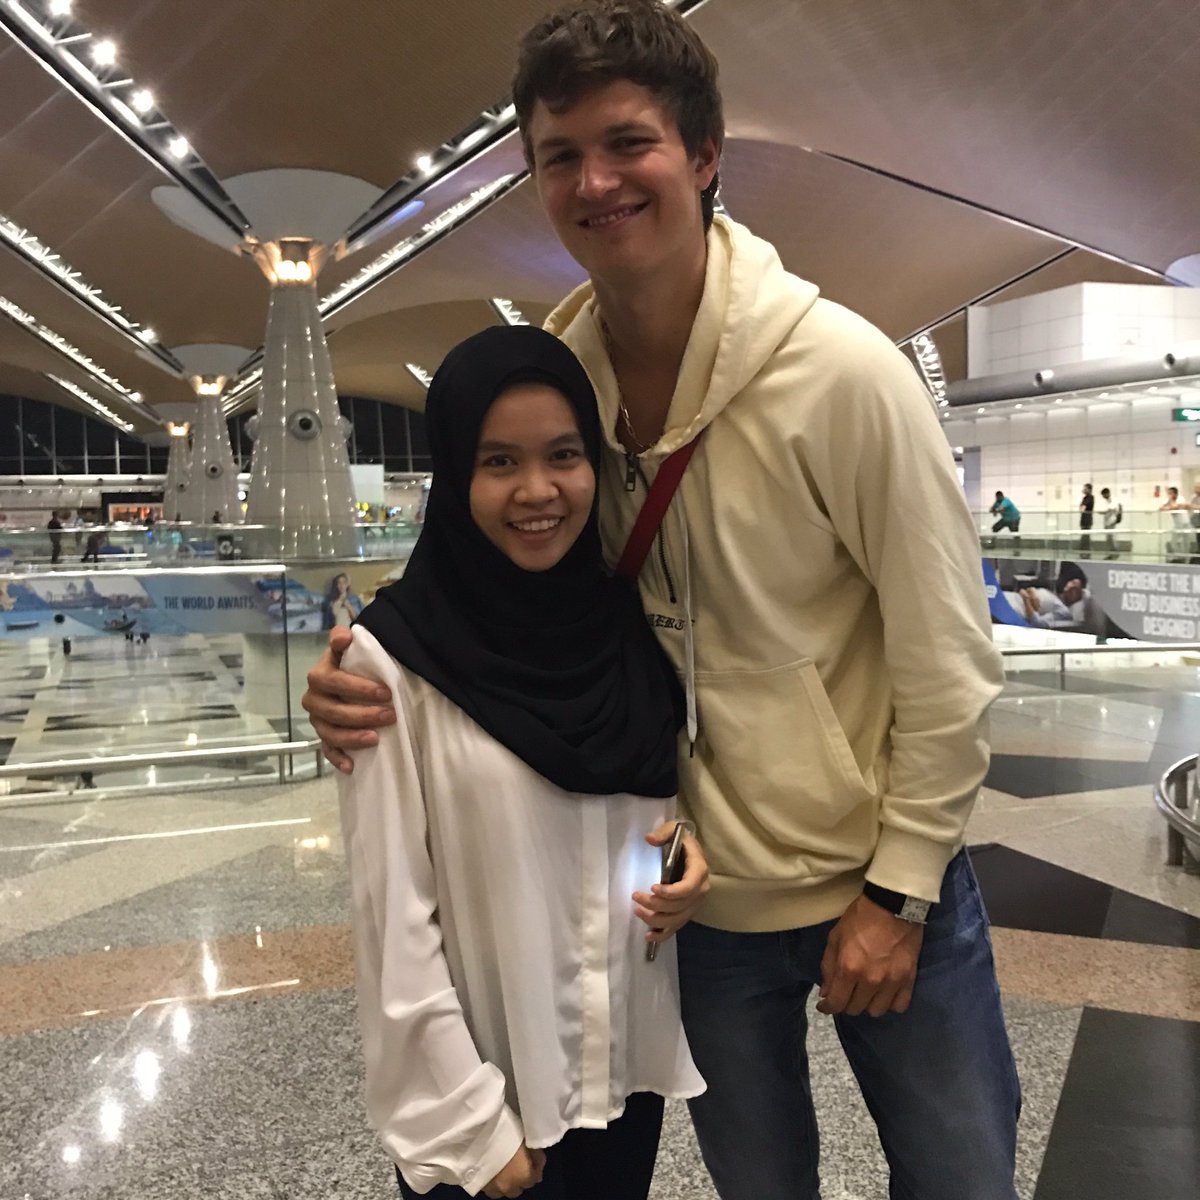 YOUR LOCAL KLANG GIRL JUST MET ANSEL ELGORT WHATS UP